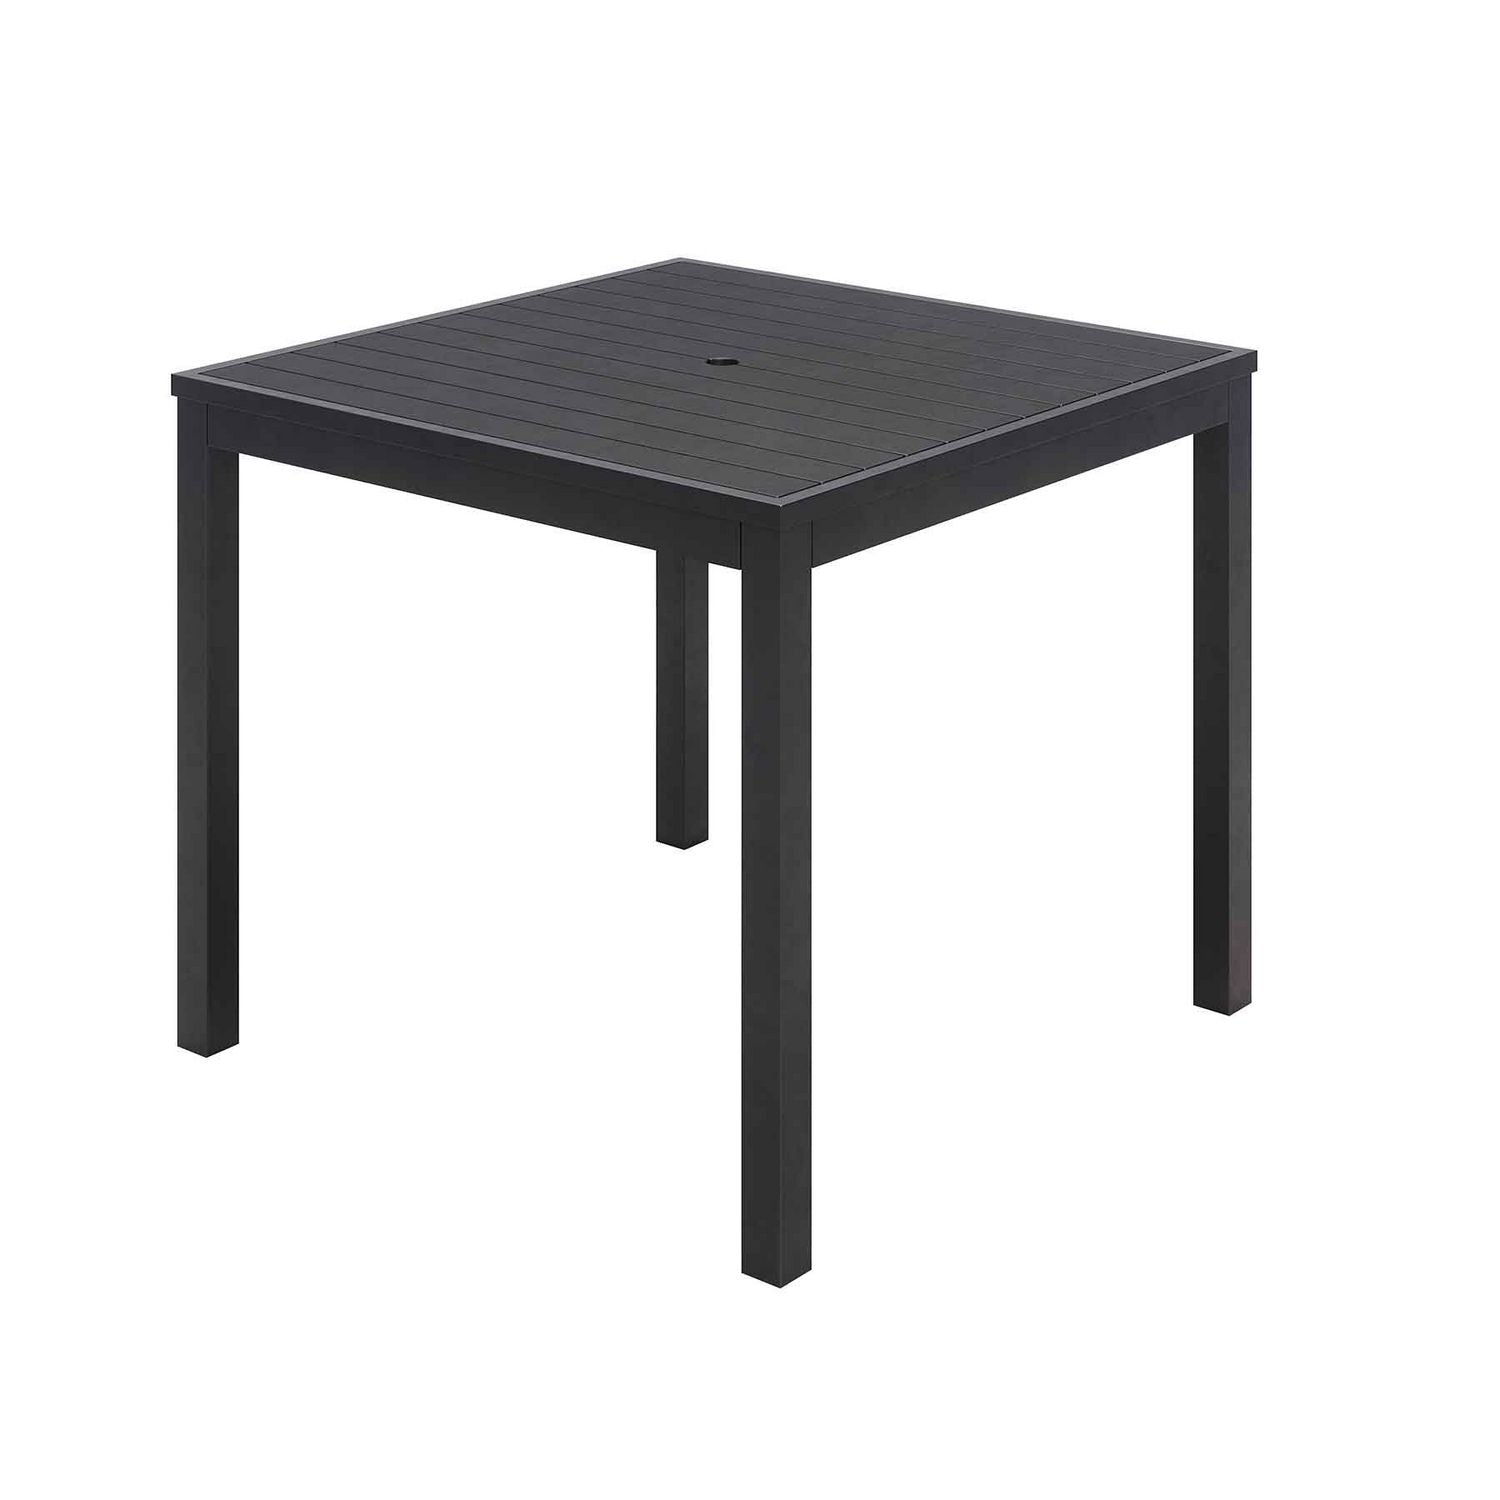 eveleen-outdoor-patio-table-with-four-black-powder-coated-polymer-chairs-square-35-black-ships-in-4-6-business-days_kfi840031925183 - 2